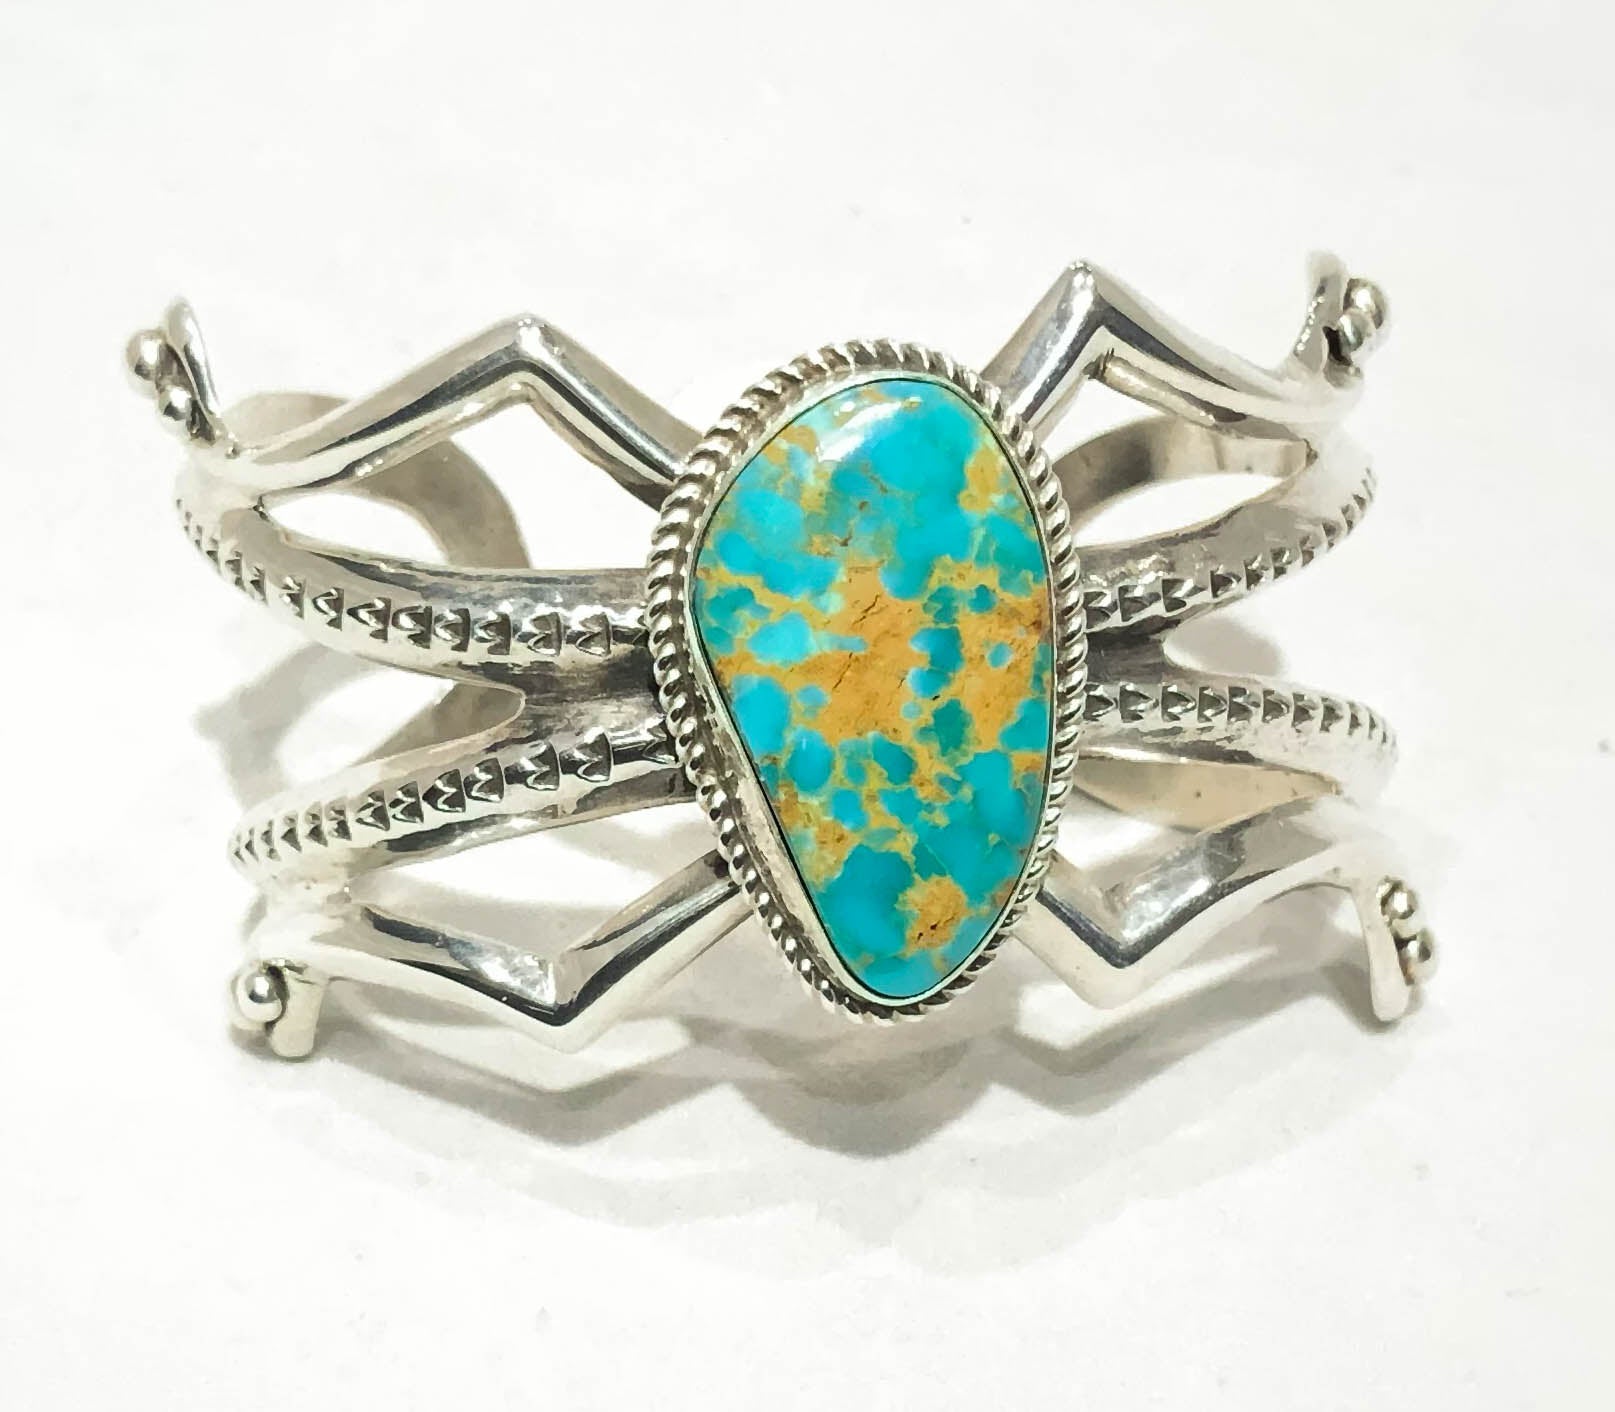 SANDCAST CUFF WITH TURQUOISE STONE